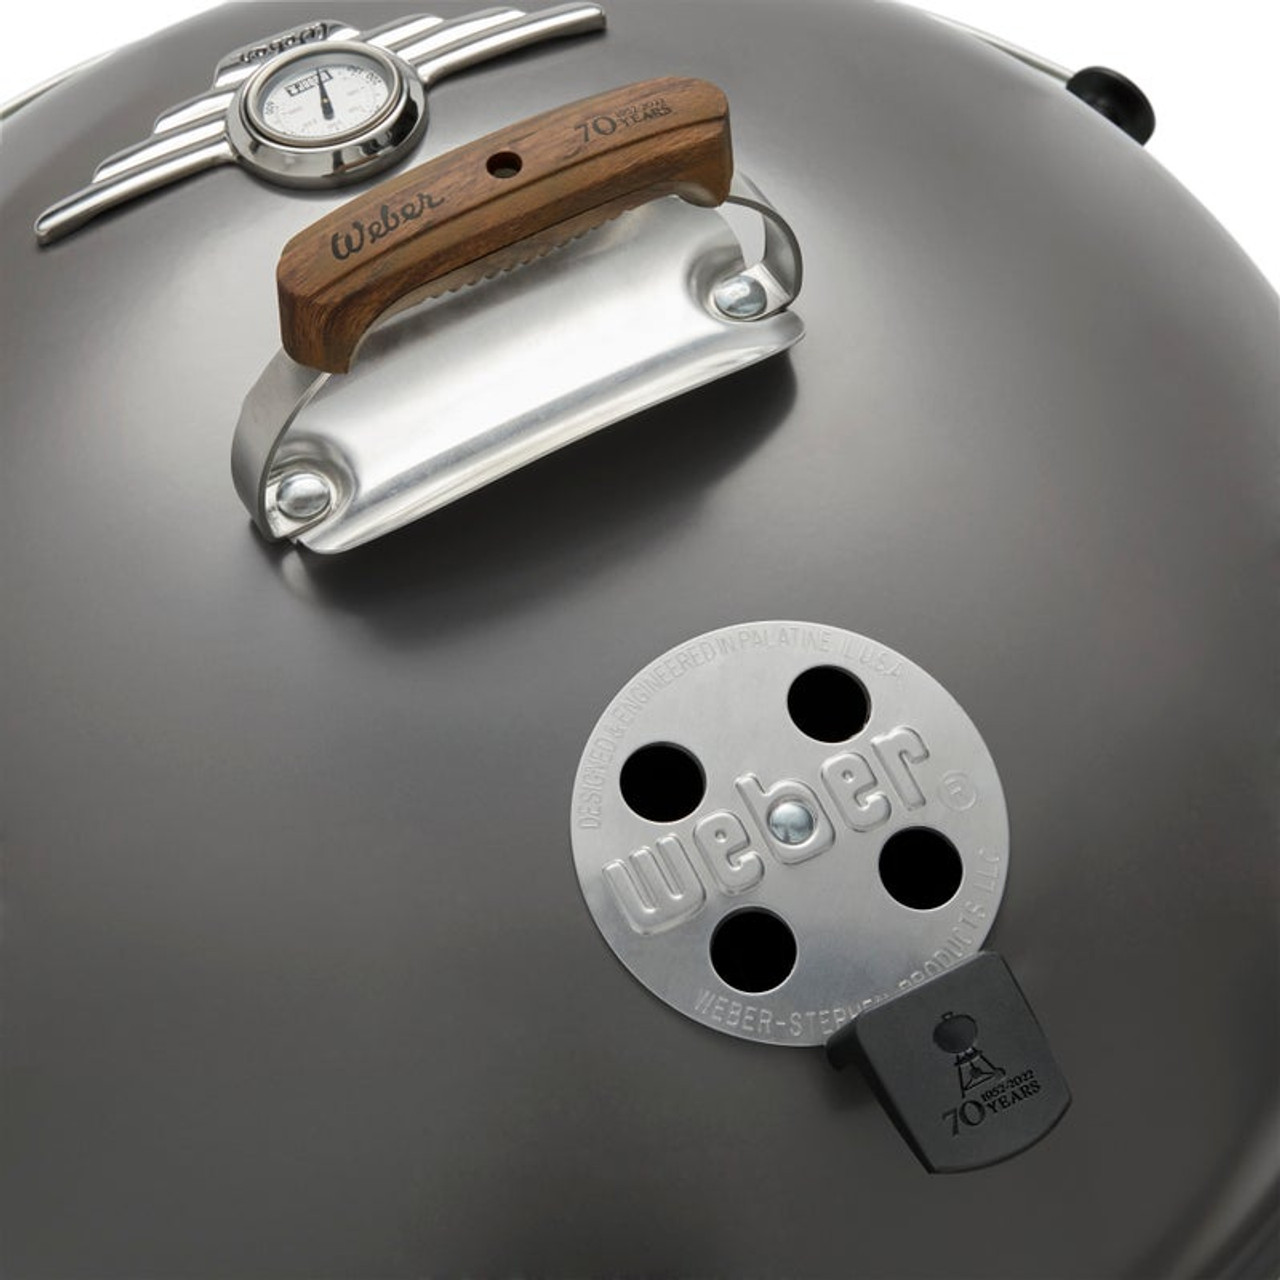 70th Anniversary Edition Kettle Charcoal Barbecue 57cm - Hollywood Grey